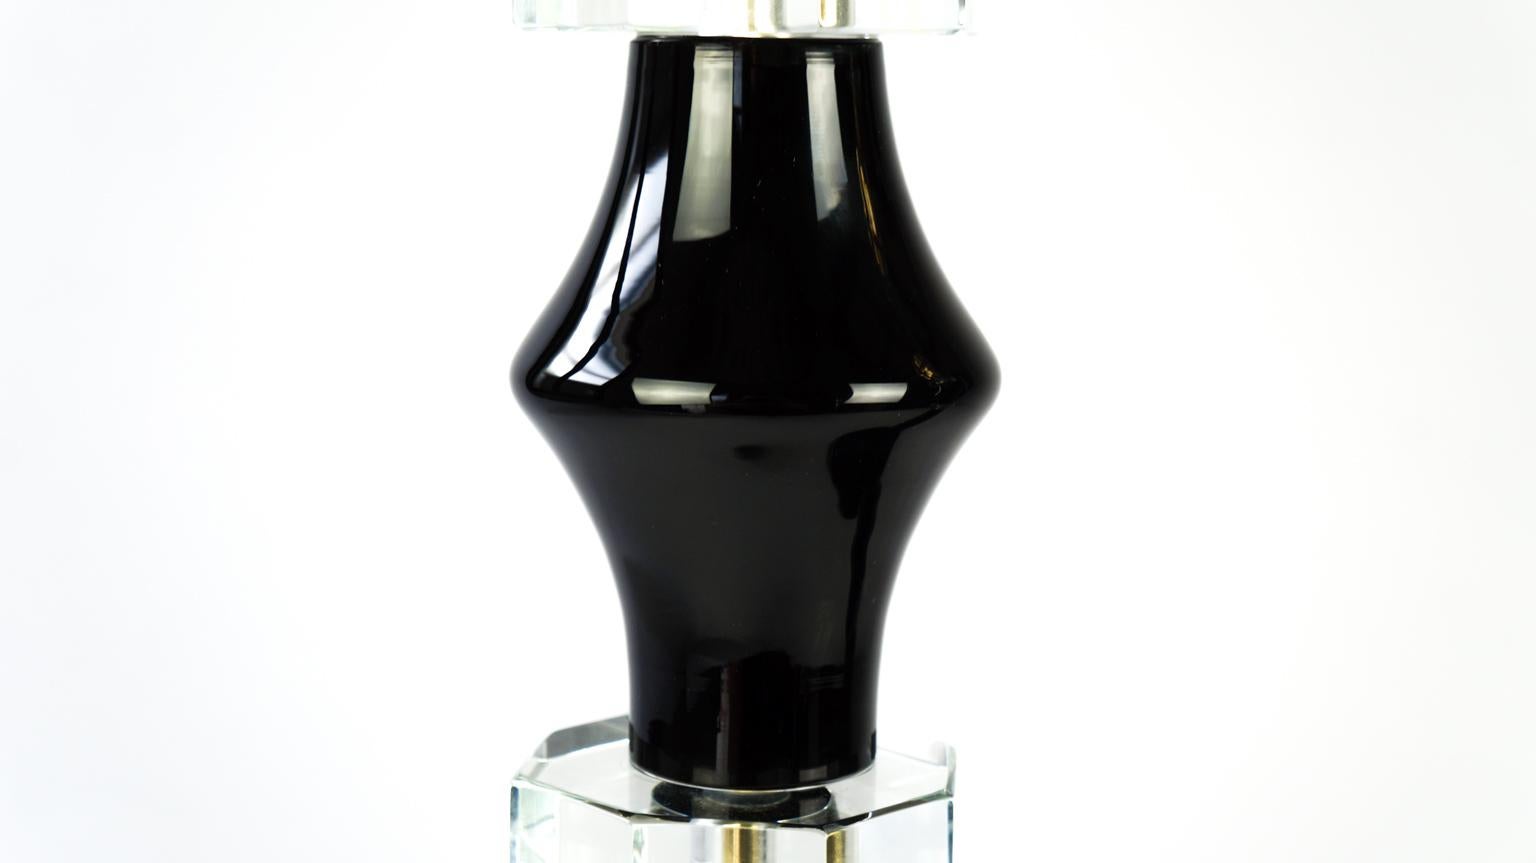 Donà Furnace Mid-Century Modern Black Two of Murano Glass Table Lamps, 1978 For Sale 7